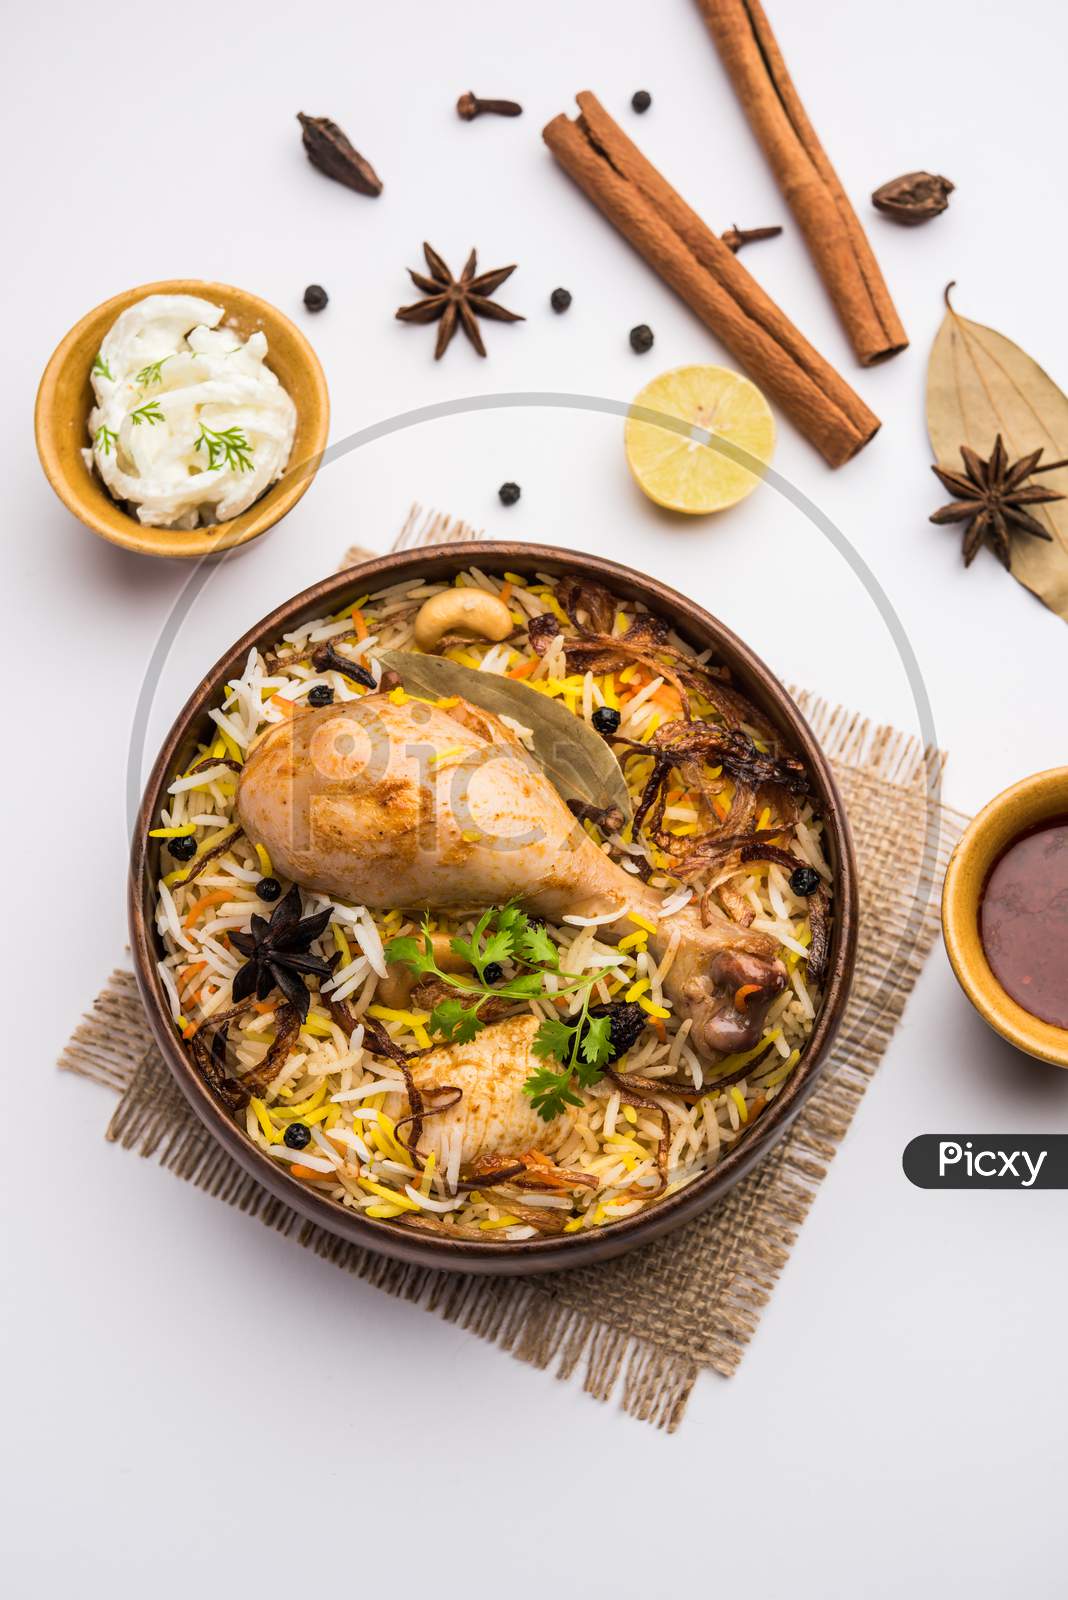 Restaurant Style Chicken Biryani - It'S A Popular Non-Veg Food From India, Served In A Bowl